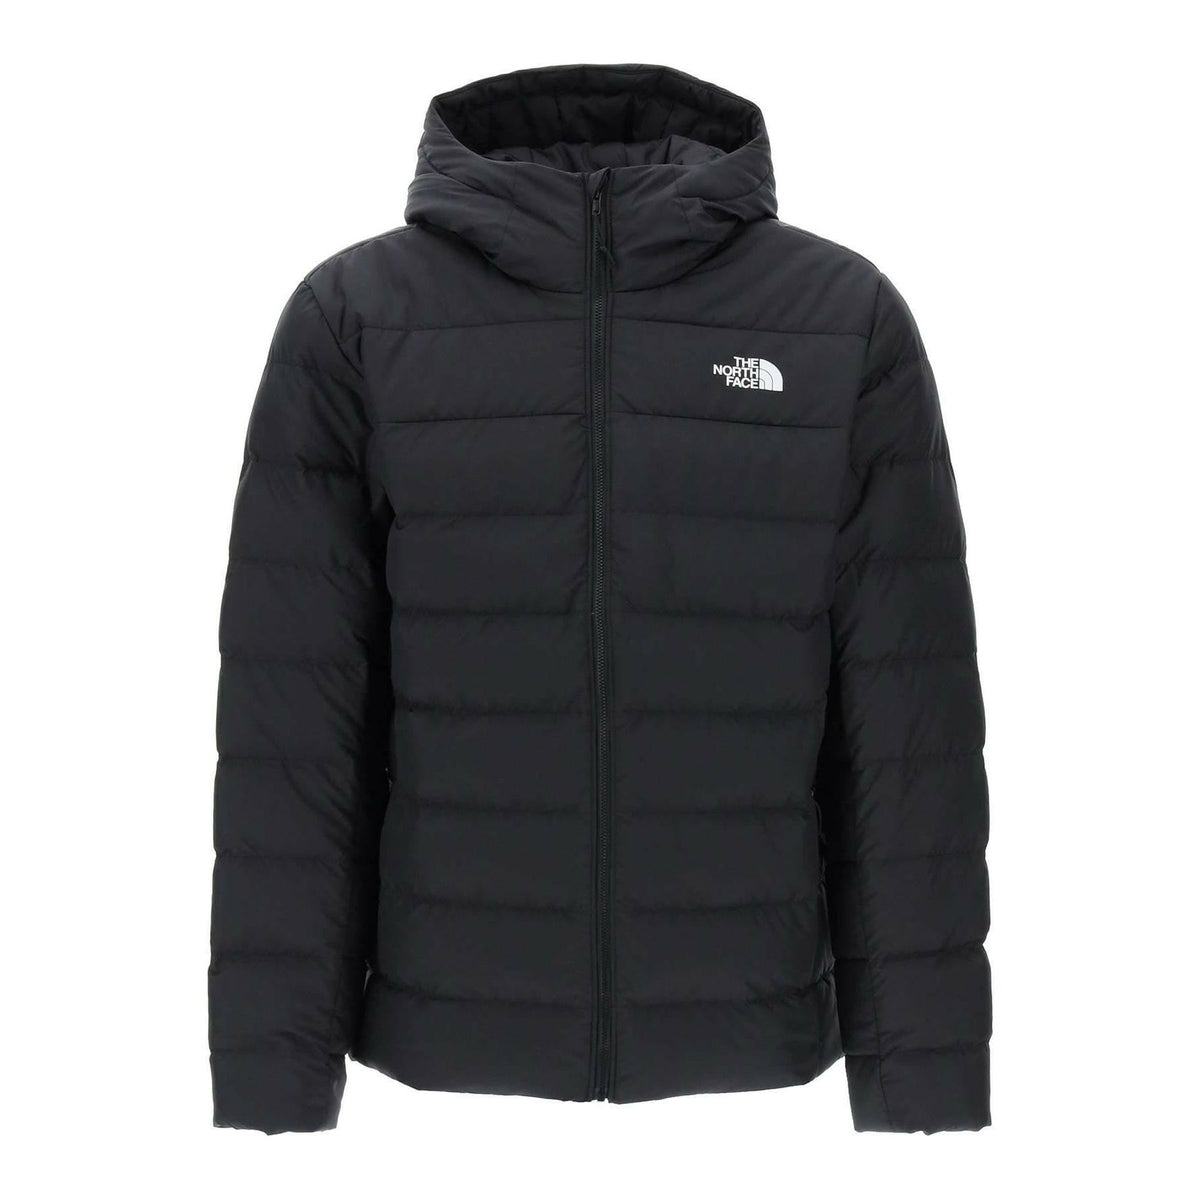 THE NORTH FACE - The North Face Black Aconcagua Iii Lightweight Puffer Jacket with recycled down - JOHN JULIA